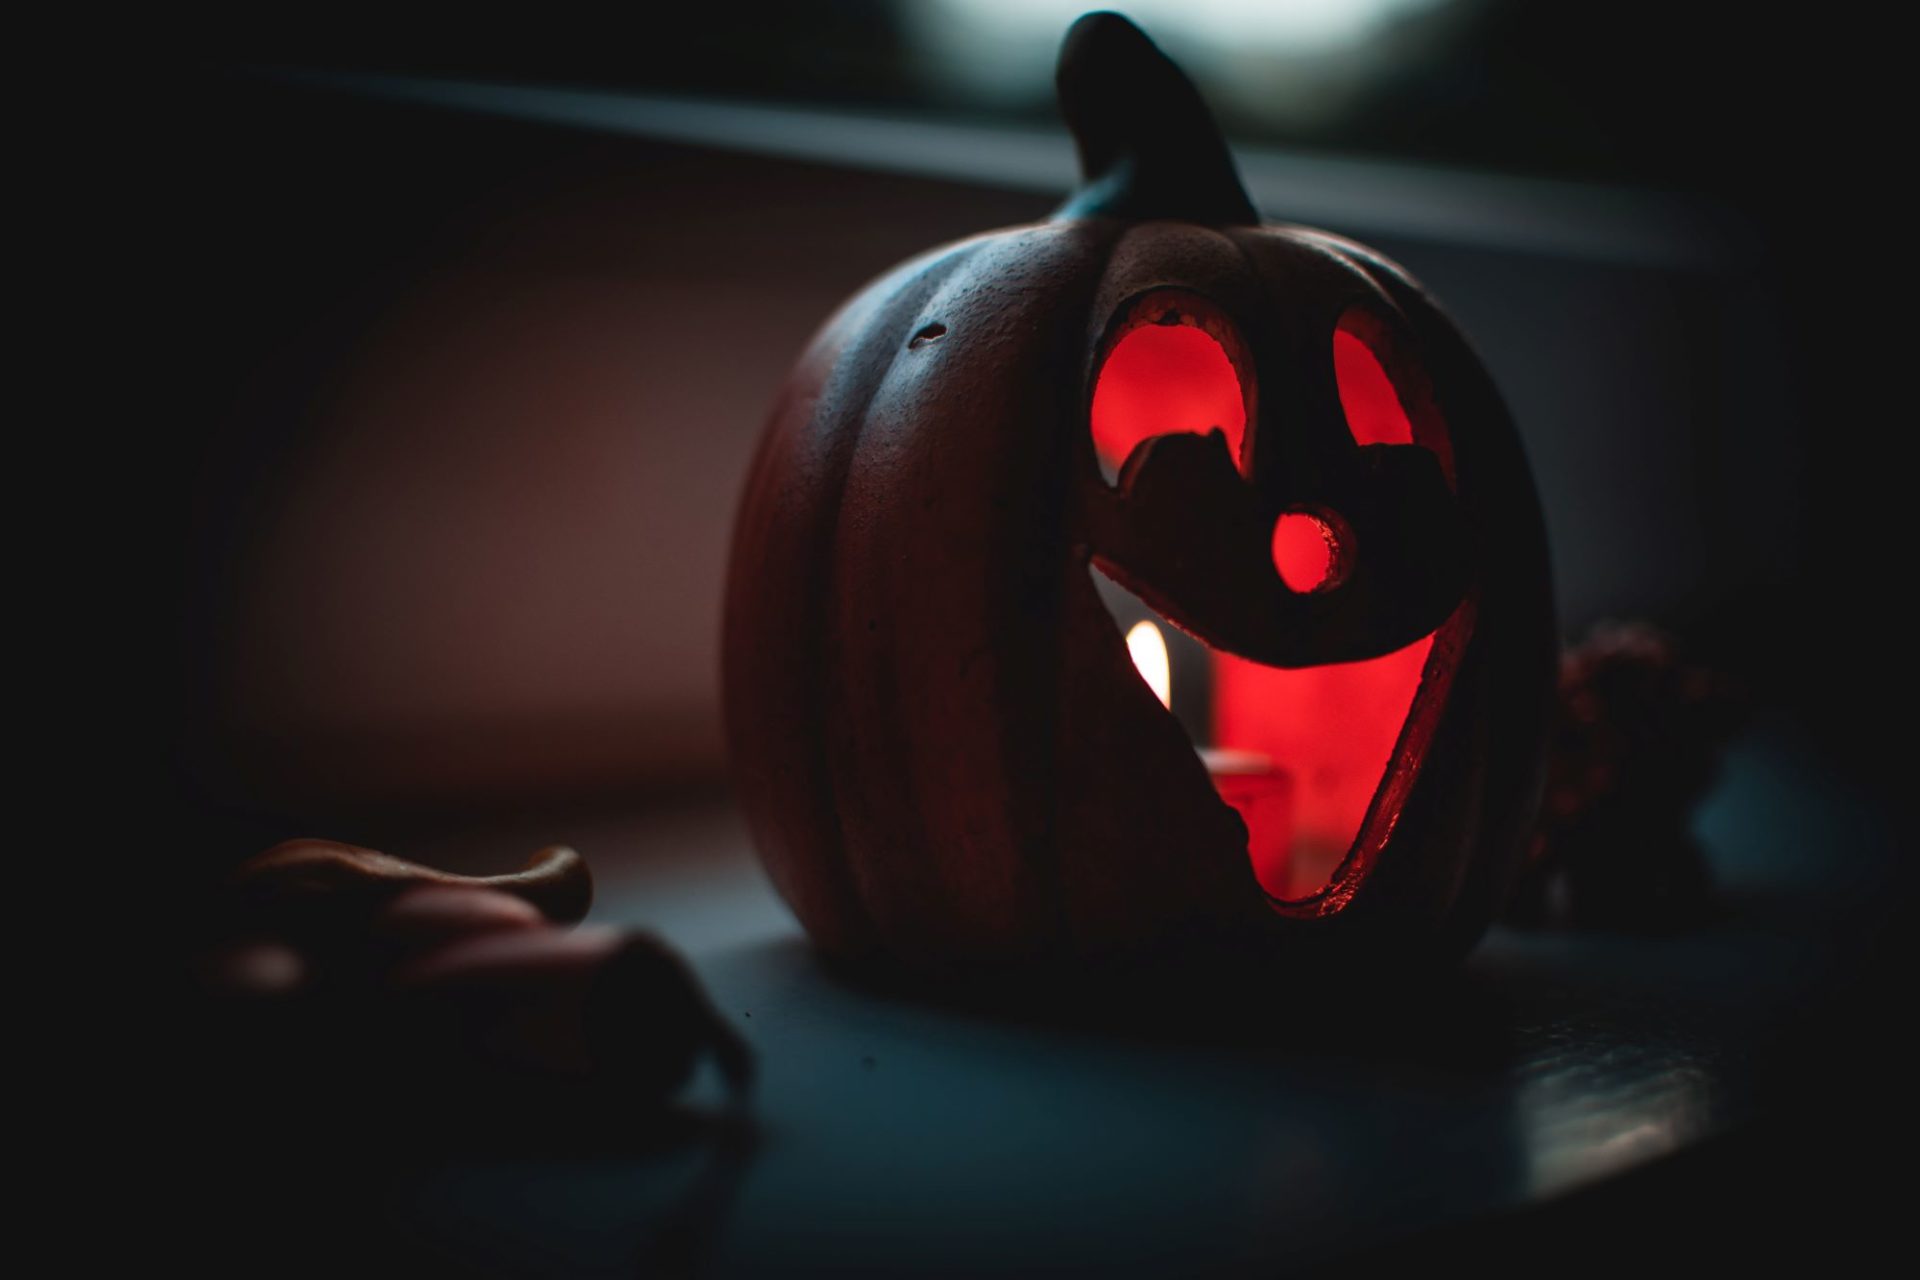 A lighted jack-o-lantern with two large eyes, a small nose, and a large smiling mouth.